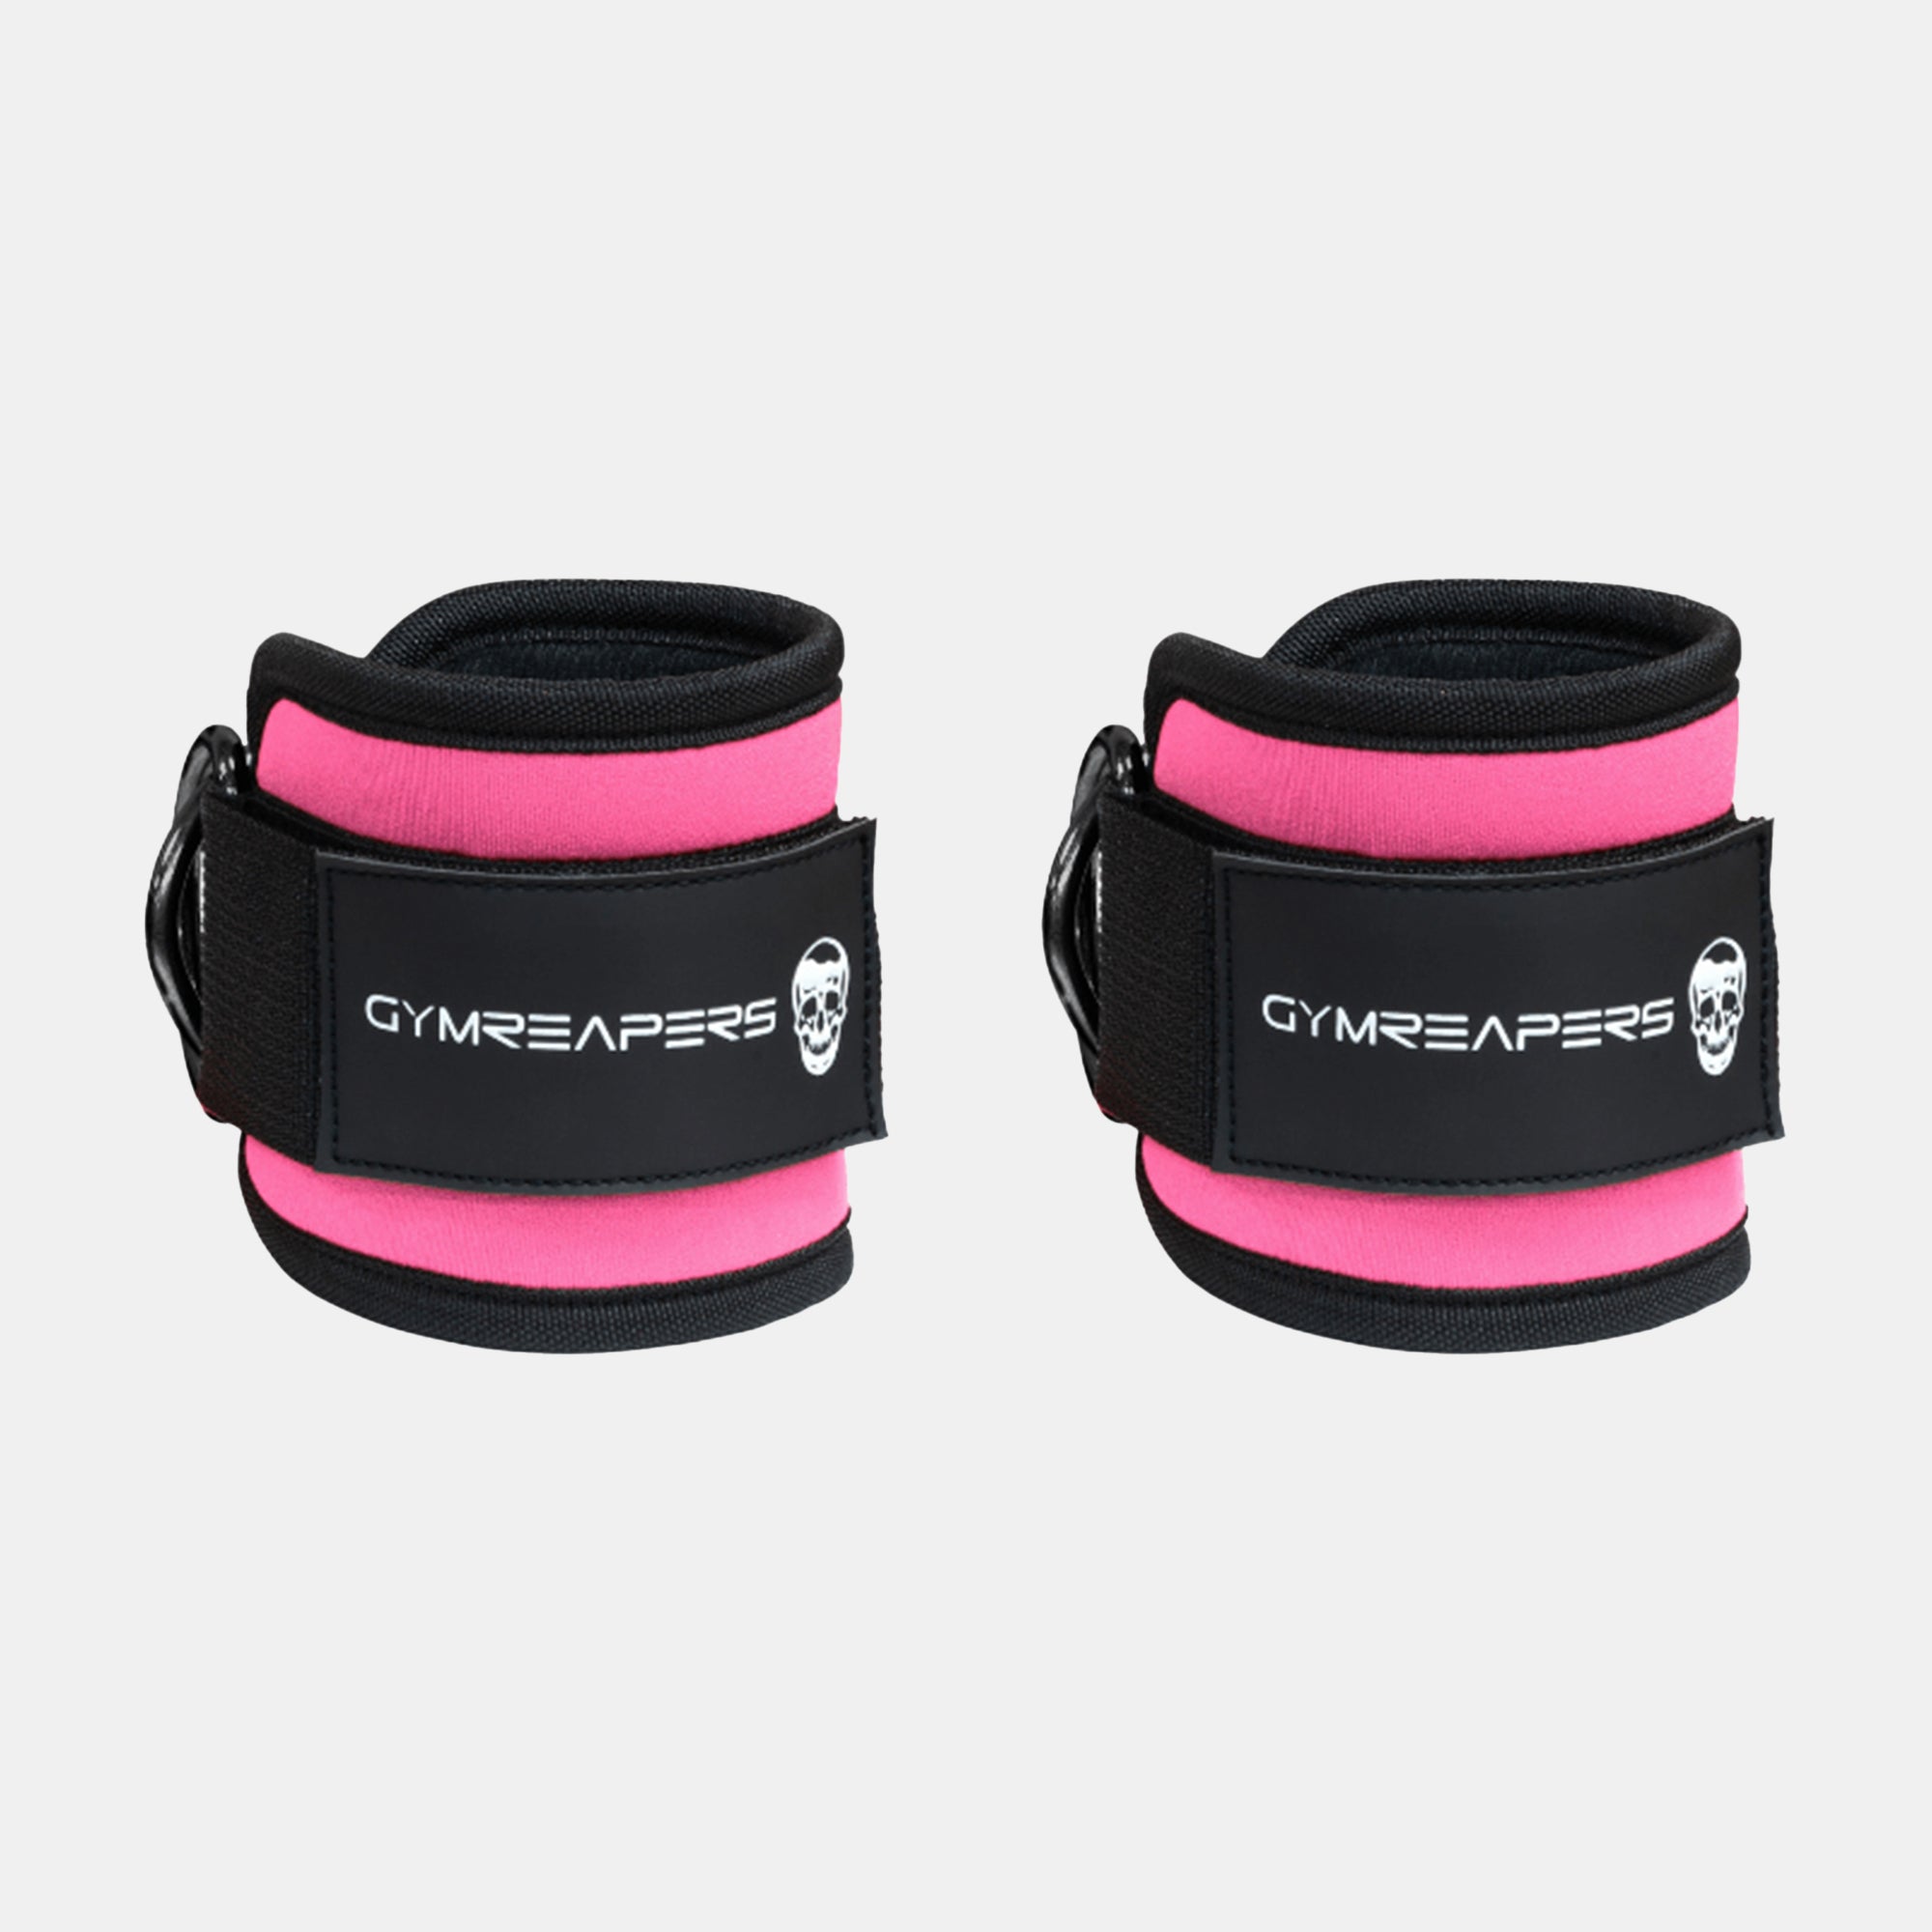 Gymreapers Ankle Straps - Pink (Pair)